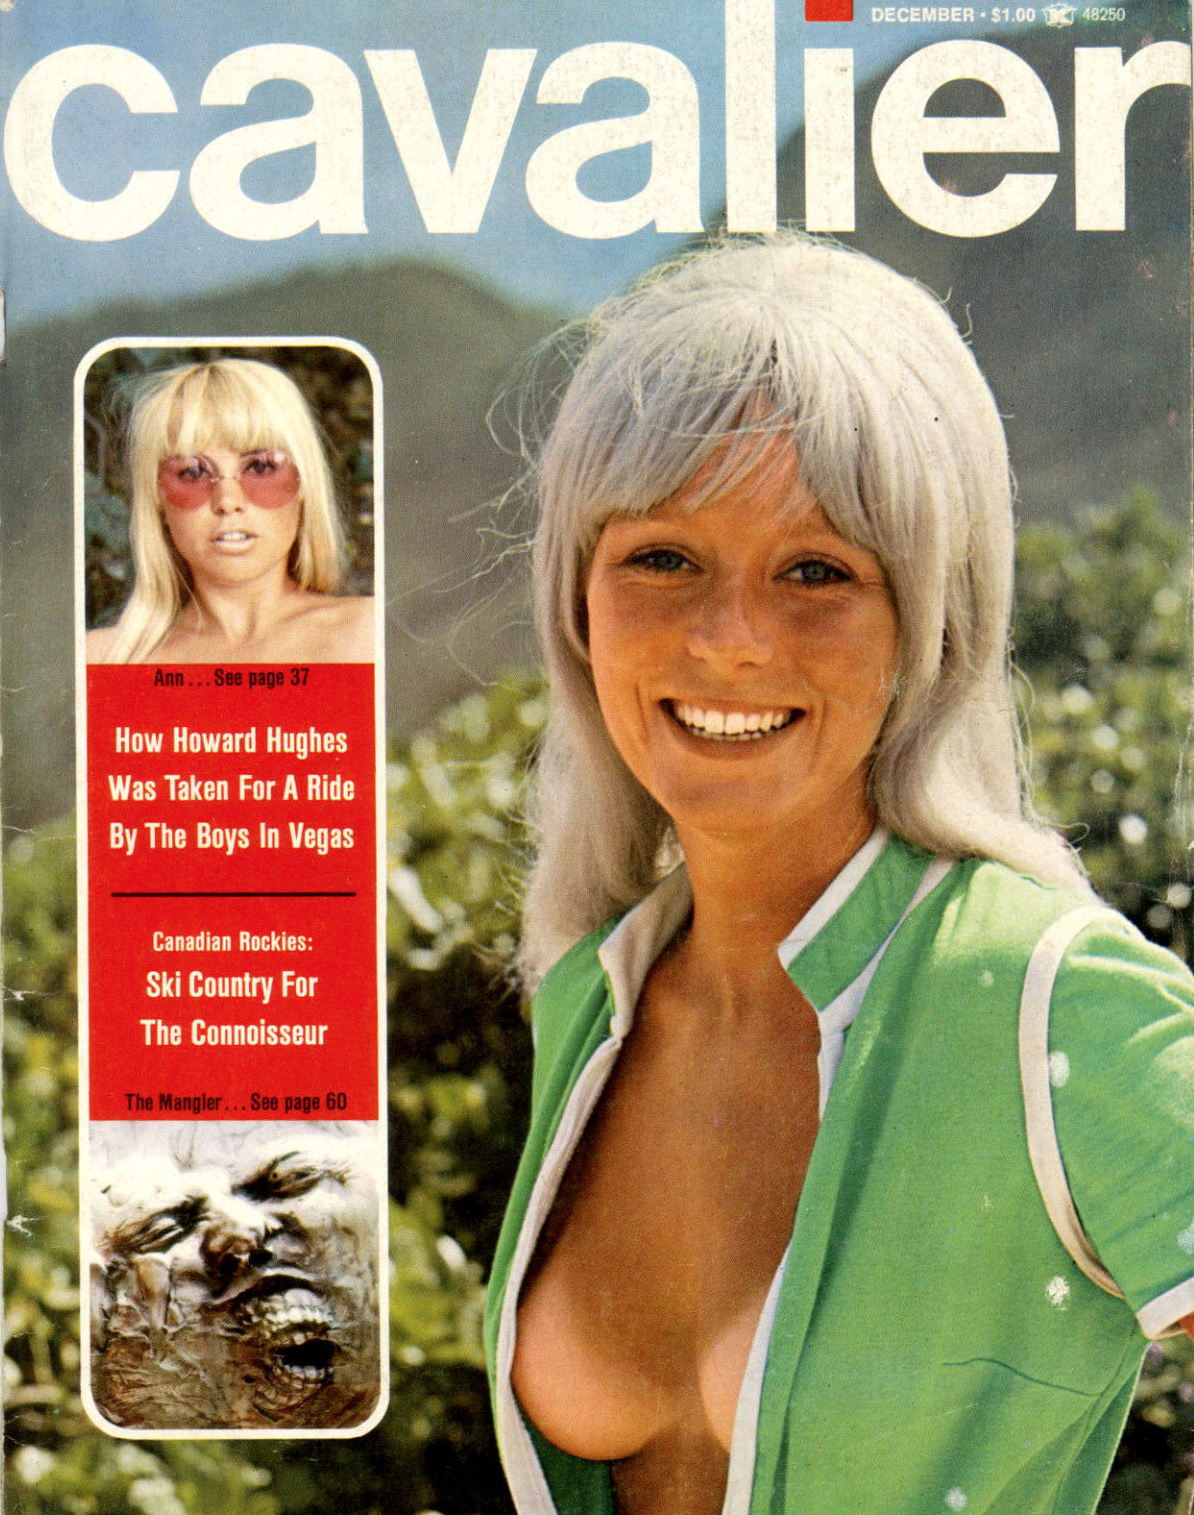 Cavalier December 1972 magazine back issue Cavalier magizine back copy Cavalier December 1972 Adult Magazine Back Issue Published by Fawcett Publications and Founded in 1952. How Howard Hughes Was Taken For A Ride By The Boys In Vegas.